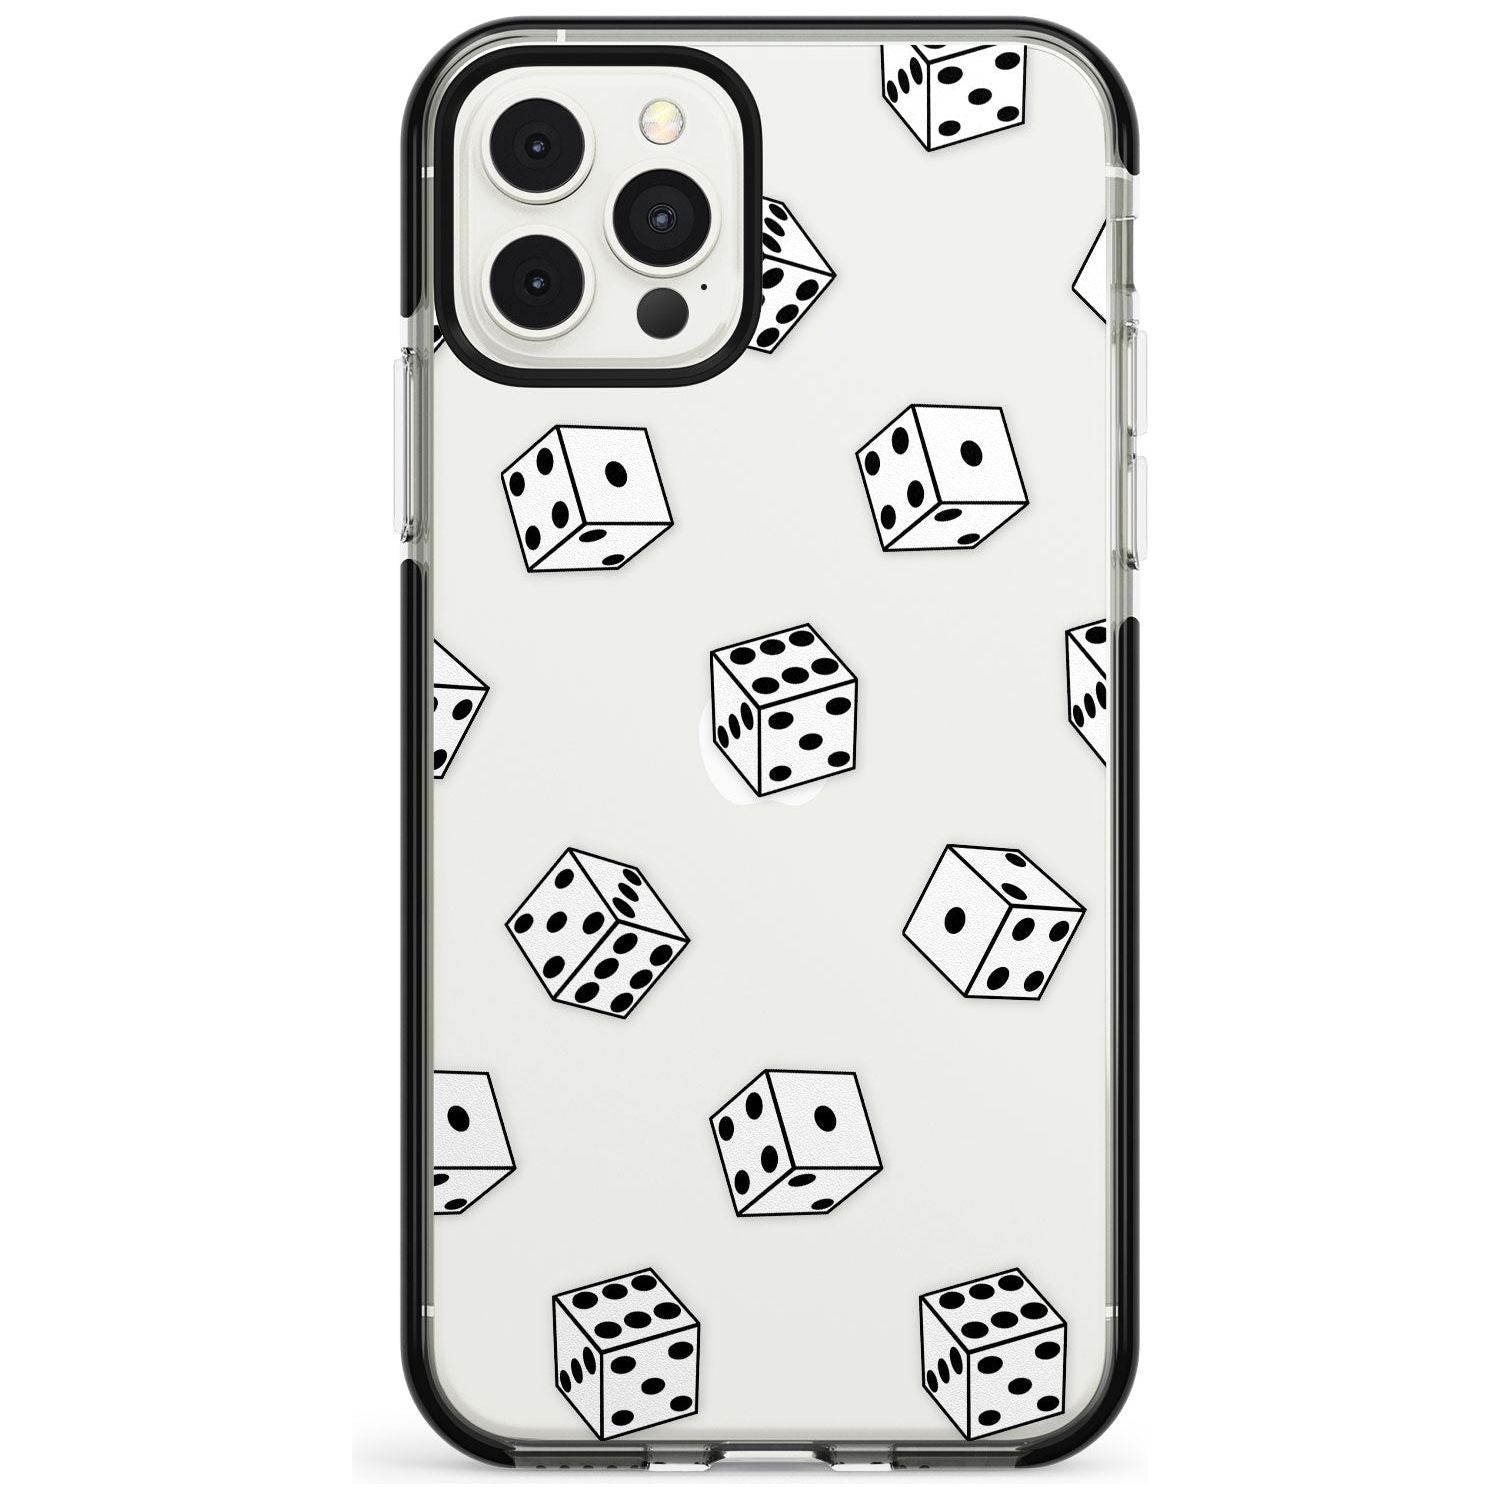 Clear Dice Pattern Black Impact Phone Case for iPhone 11